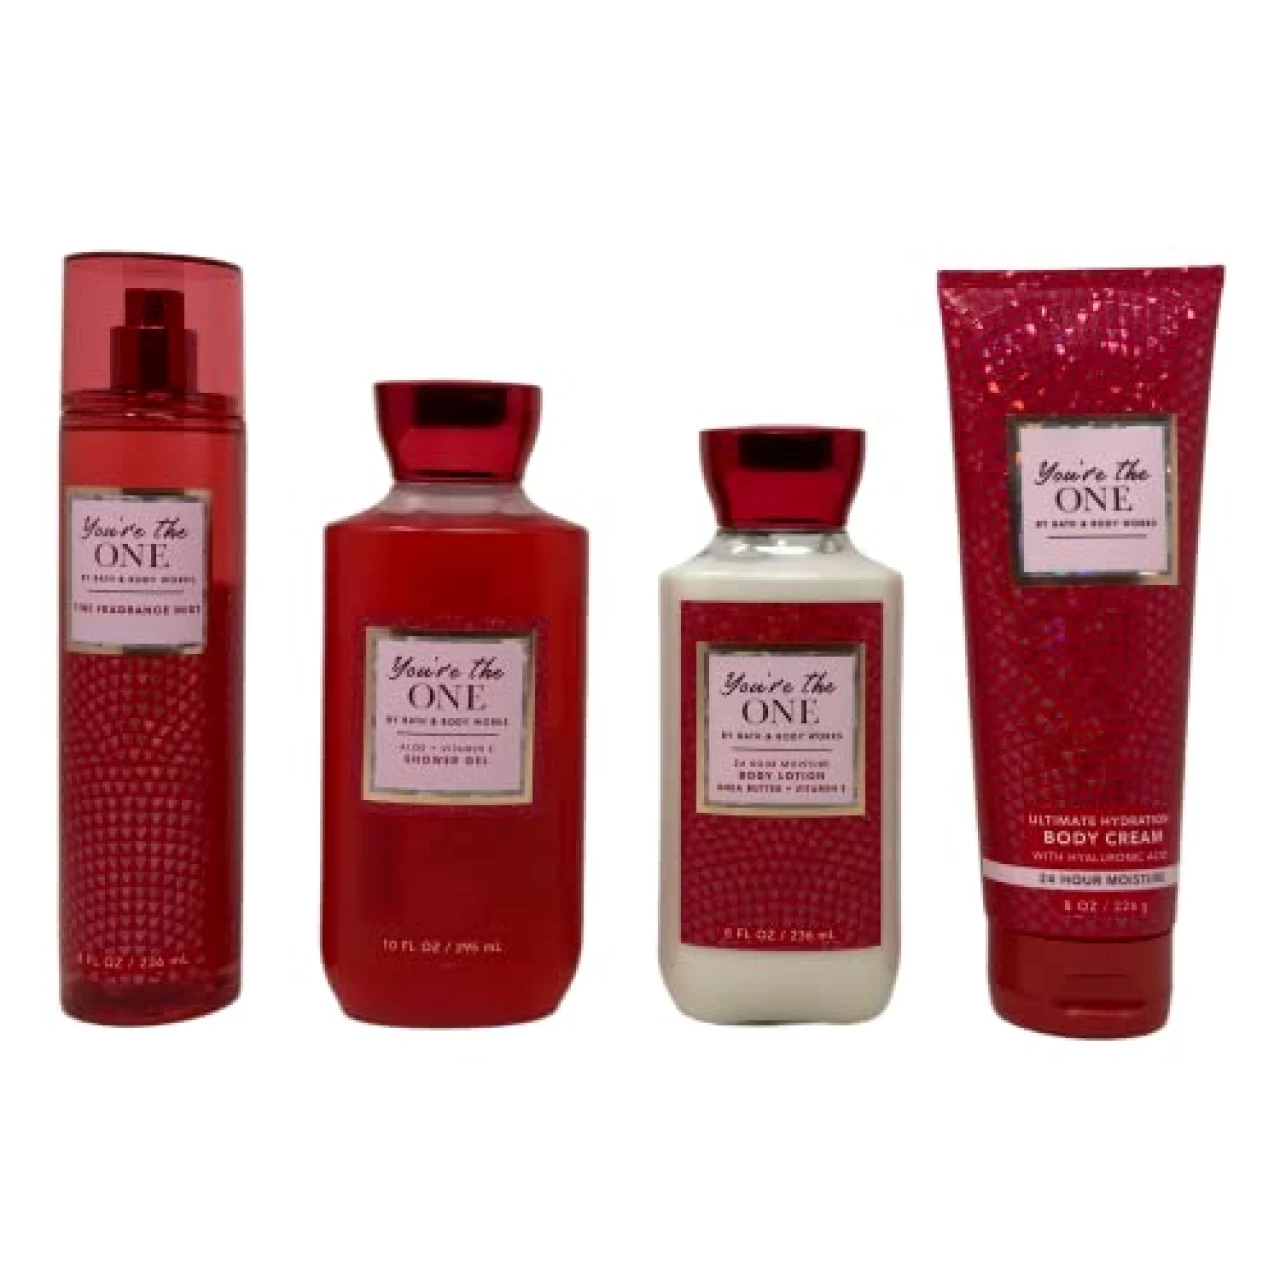 Bath &amp; Body Works You&rsquo;re the One - Deluxe Gift Set - Body Lotion - Body Cream - Fine Fragrance Mist and Shower Gel - Full Size